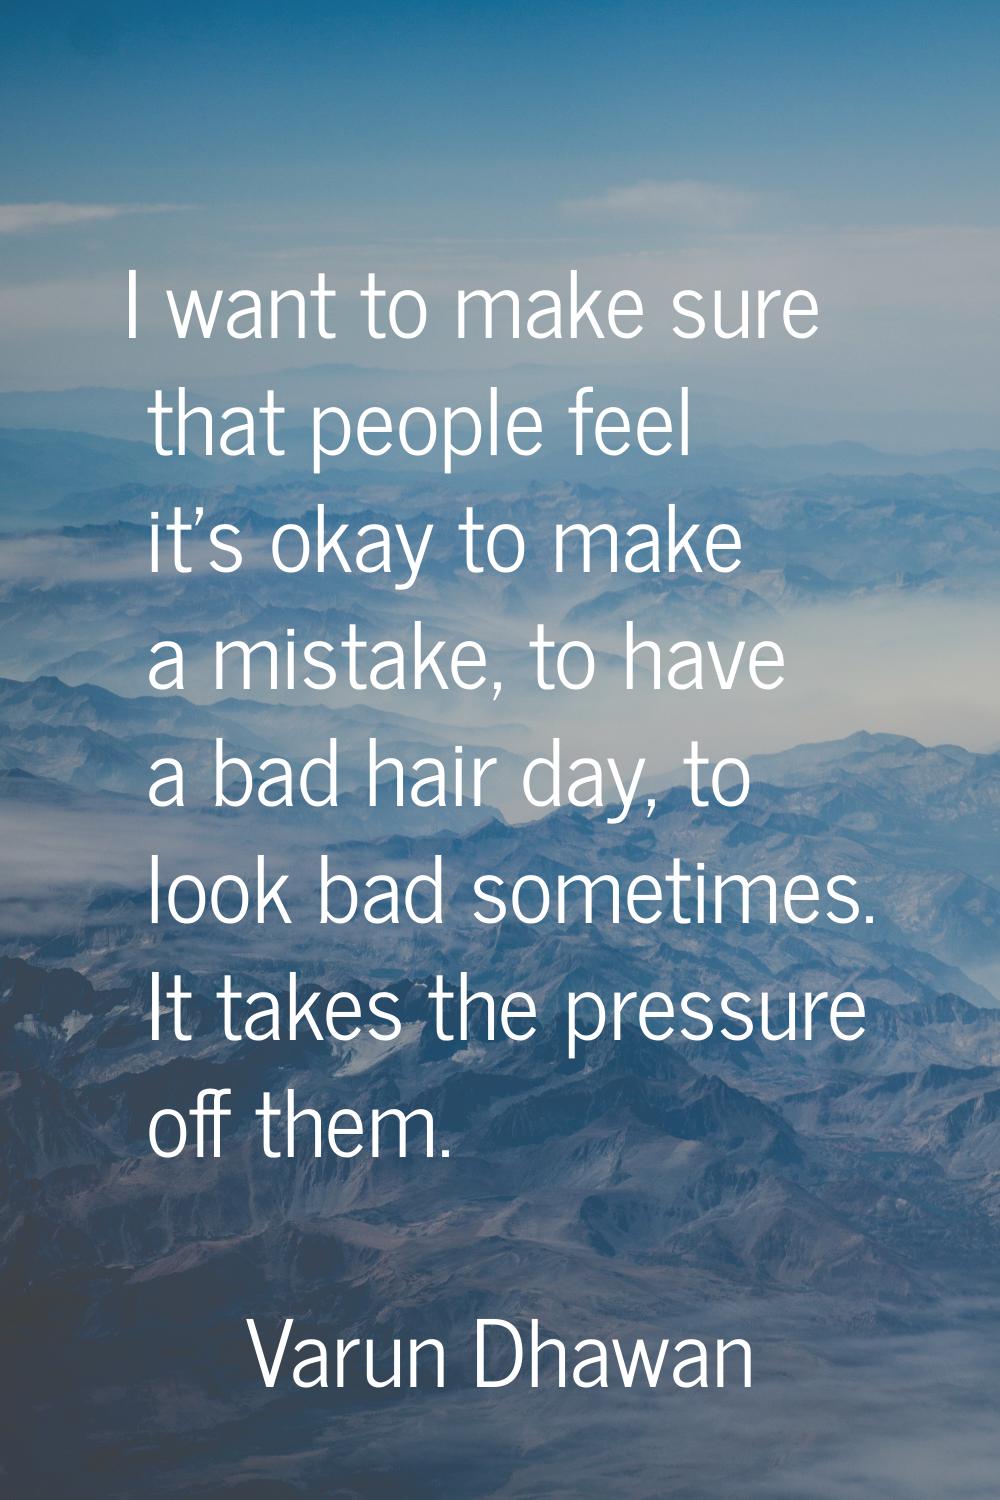 I want to make sure that people feel it's okay to make a mistake, to have a bad hair day, to look b